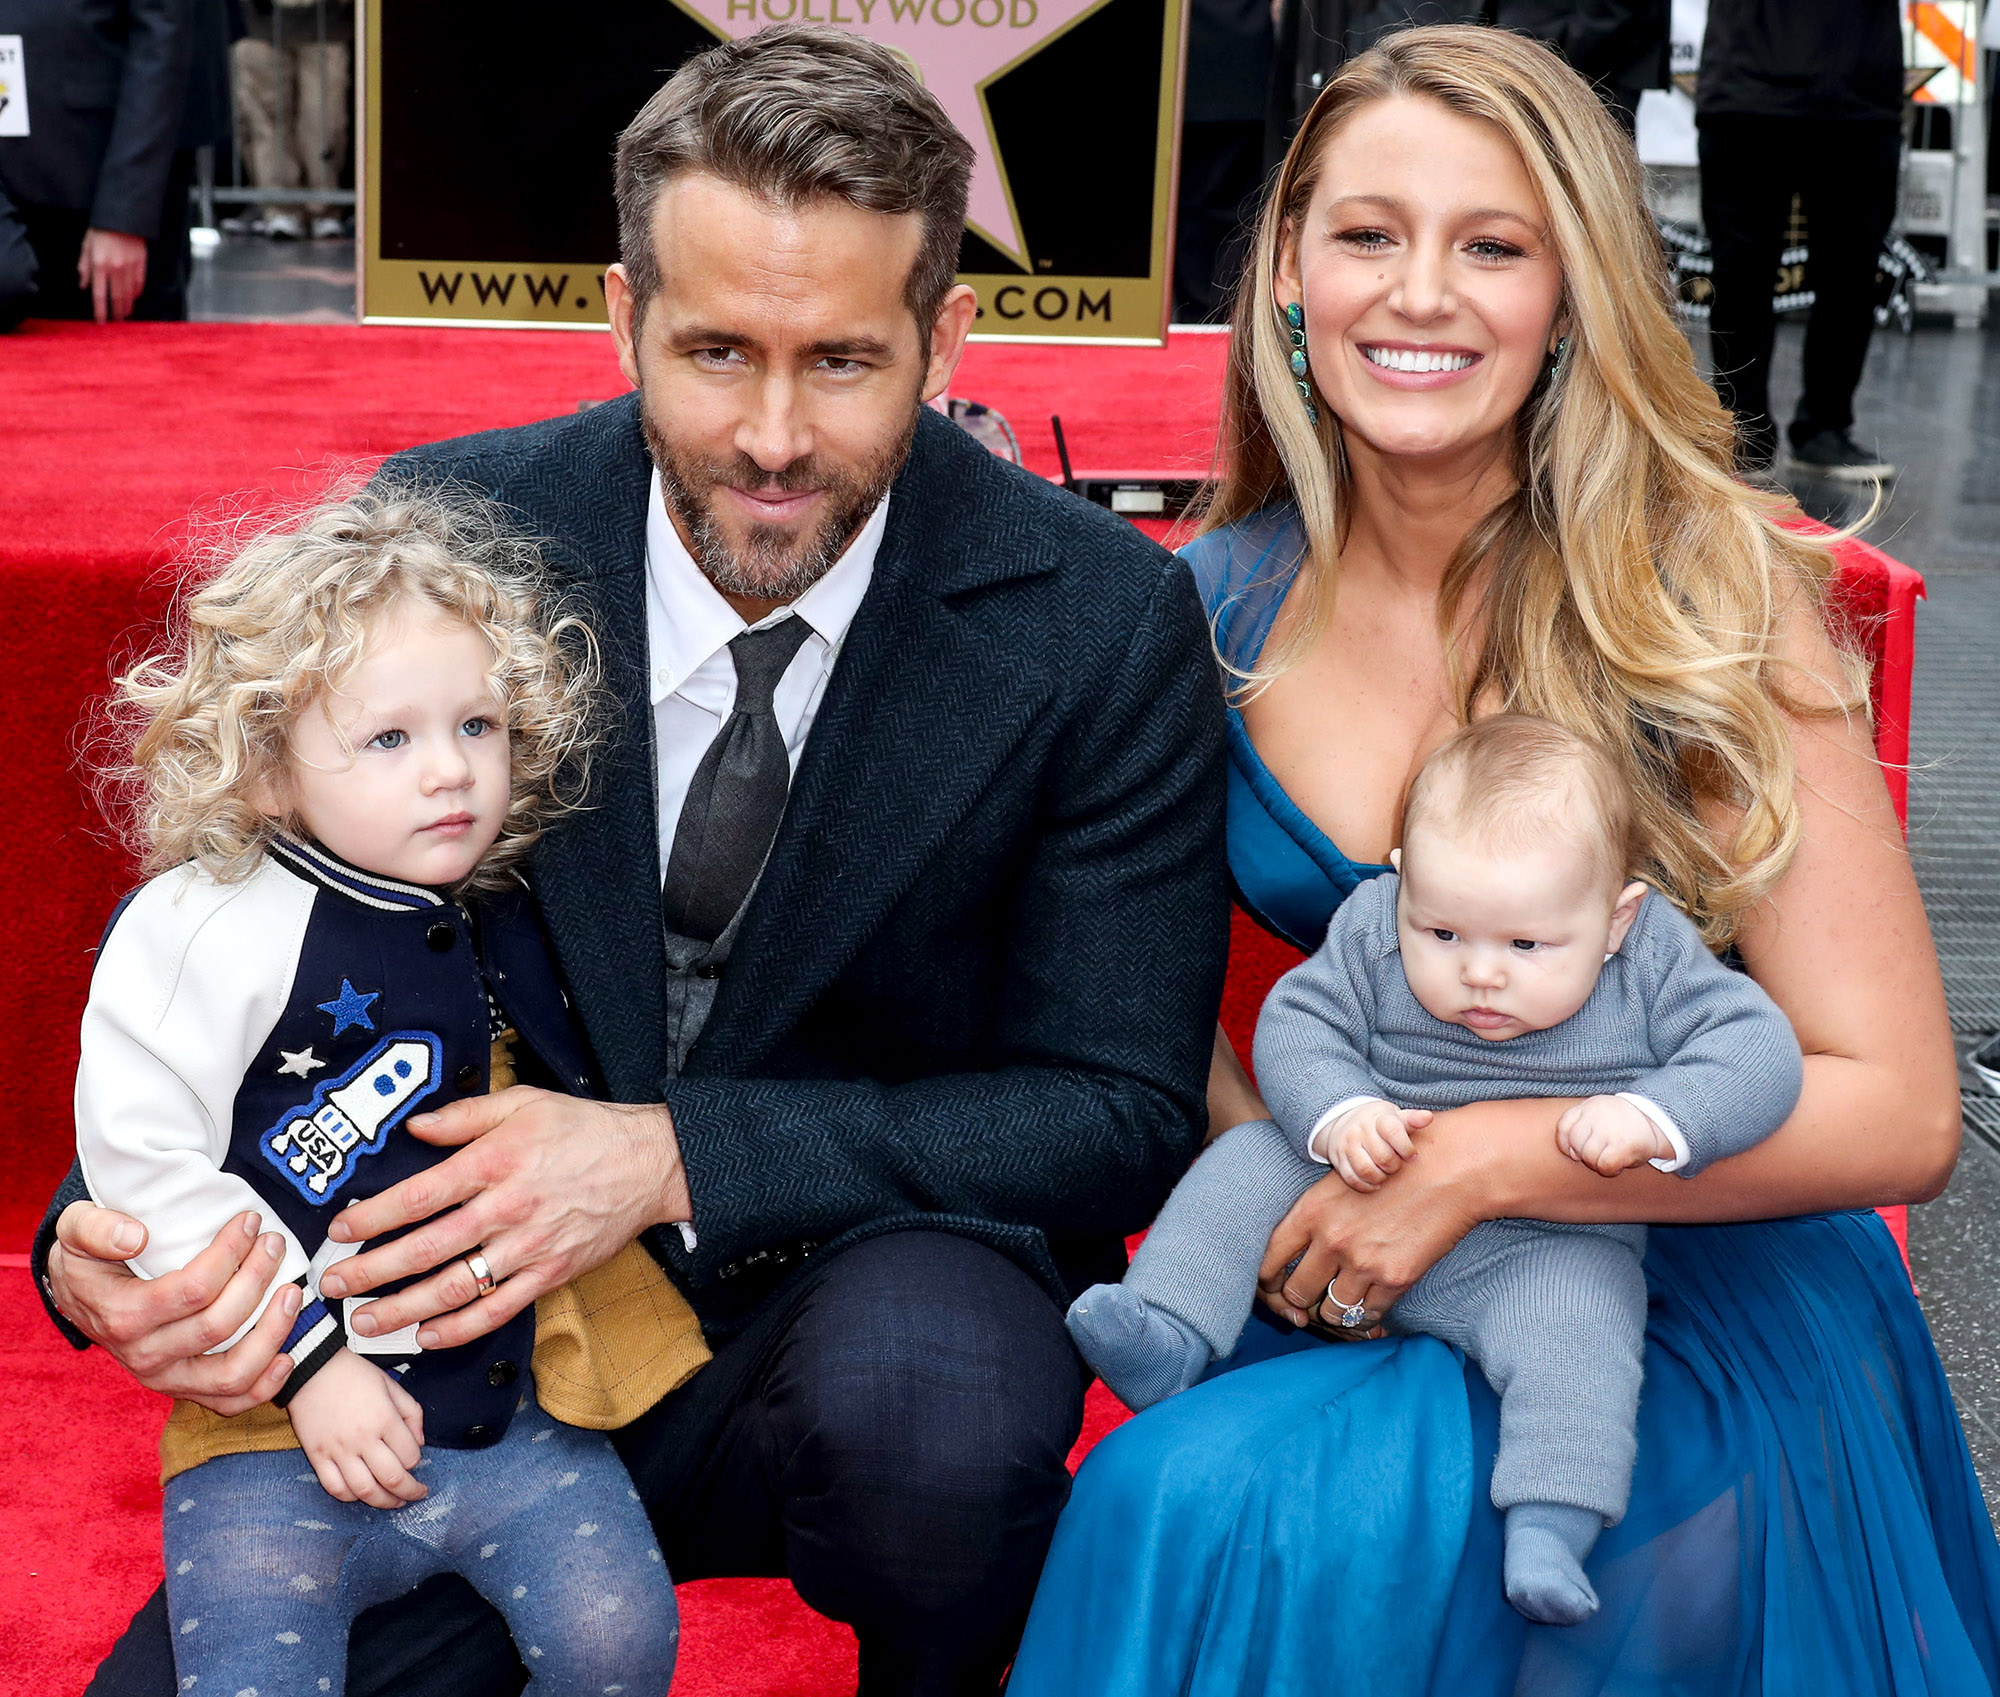 Blake Lively and Ryan Reynolds Welcome Third Child - Whether Son Or third Daughter- Remains Unanswered?